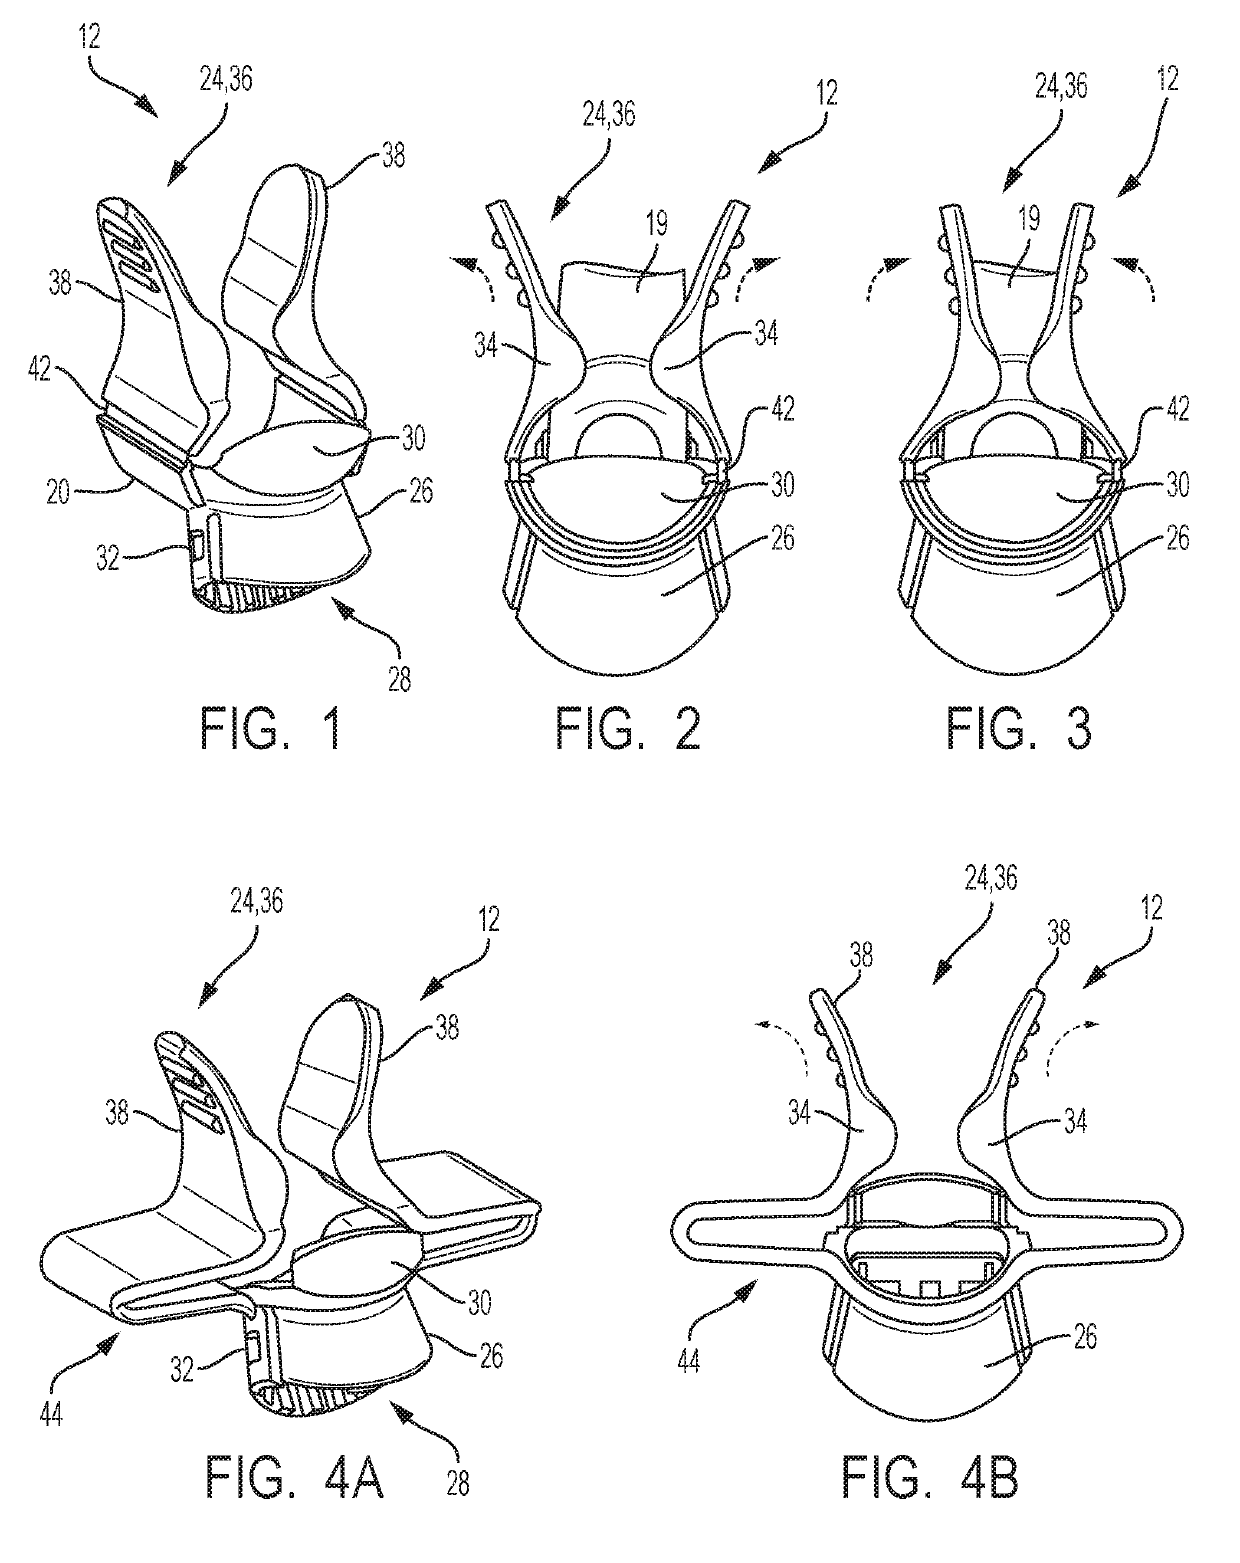 Device for Obtaining a Blood Sample